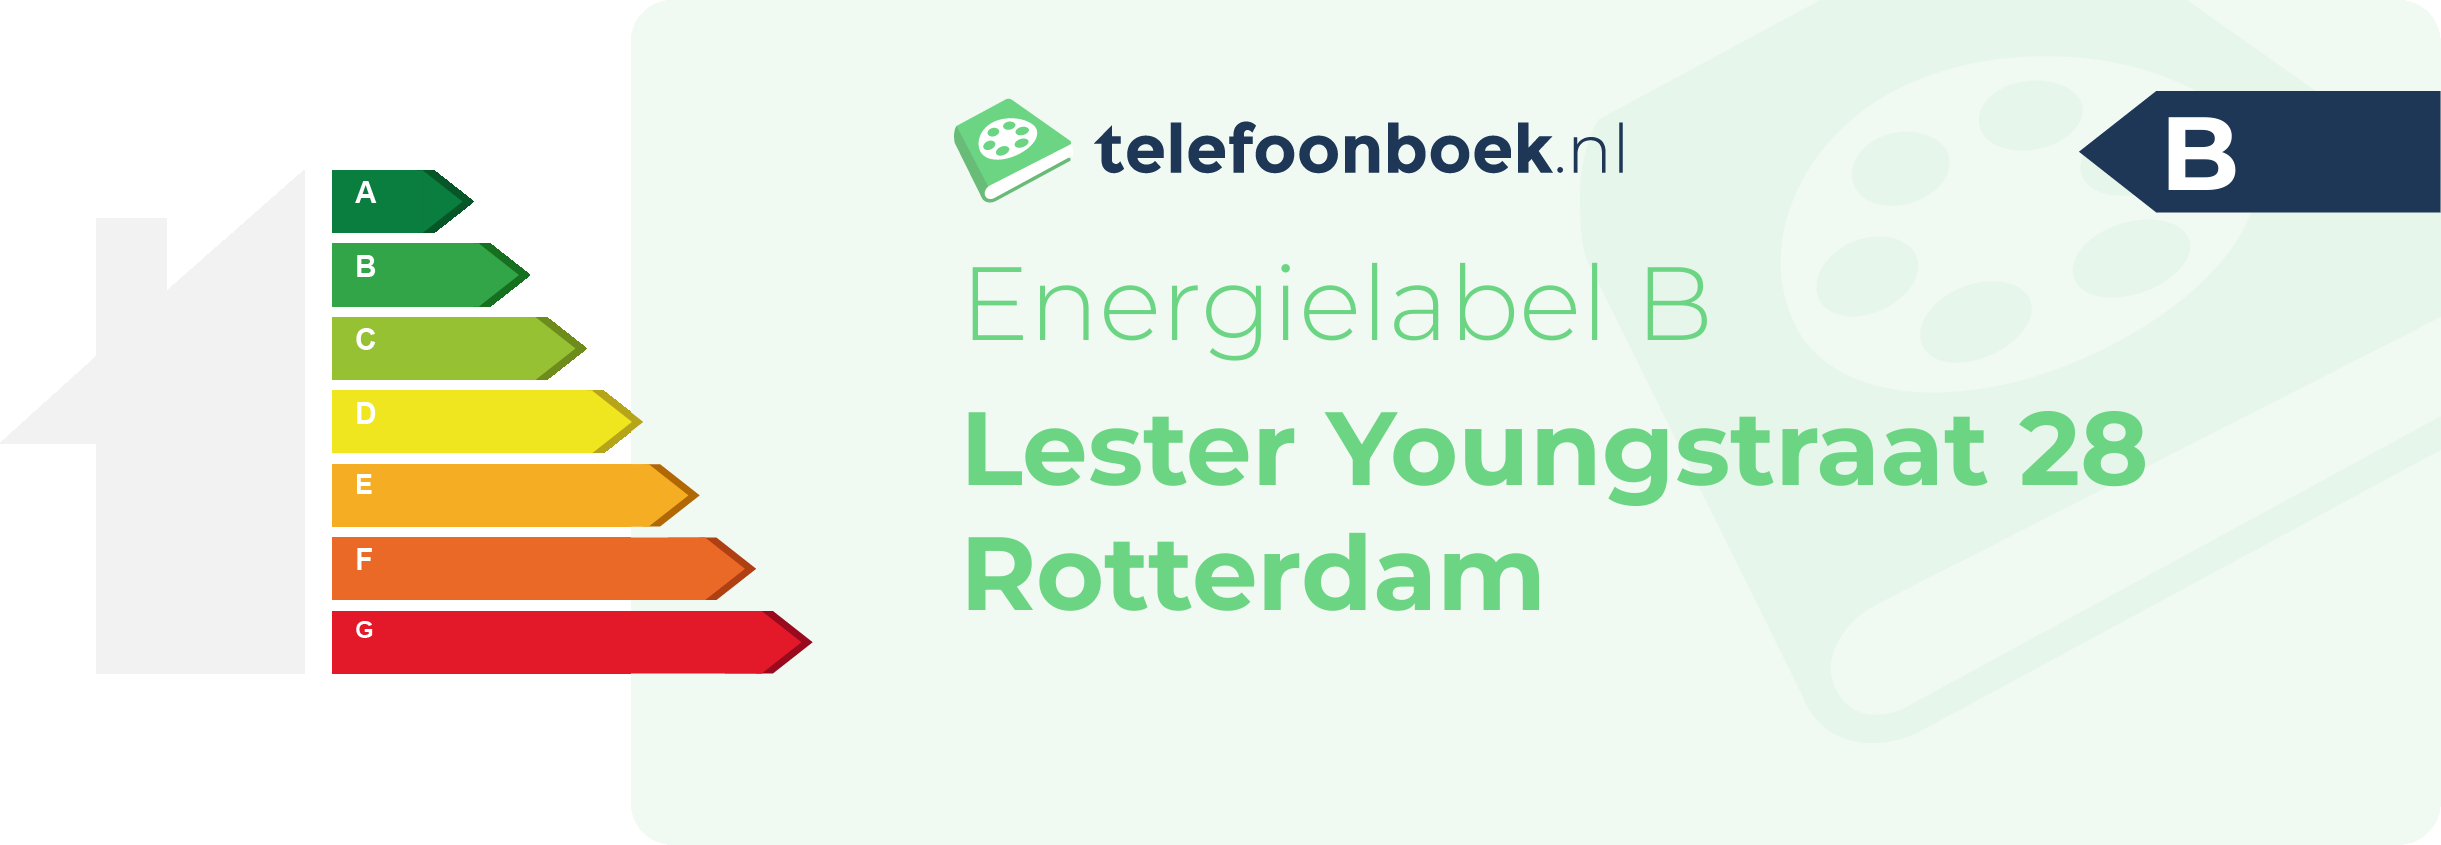 Energielabel Lester Youngstraat 28 Rotterdam